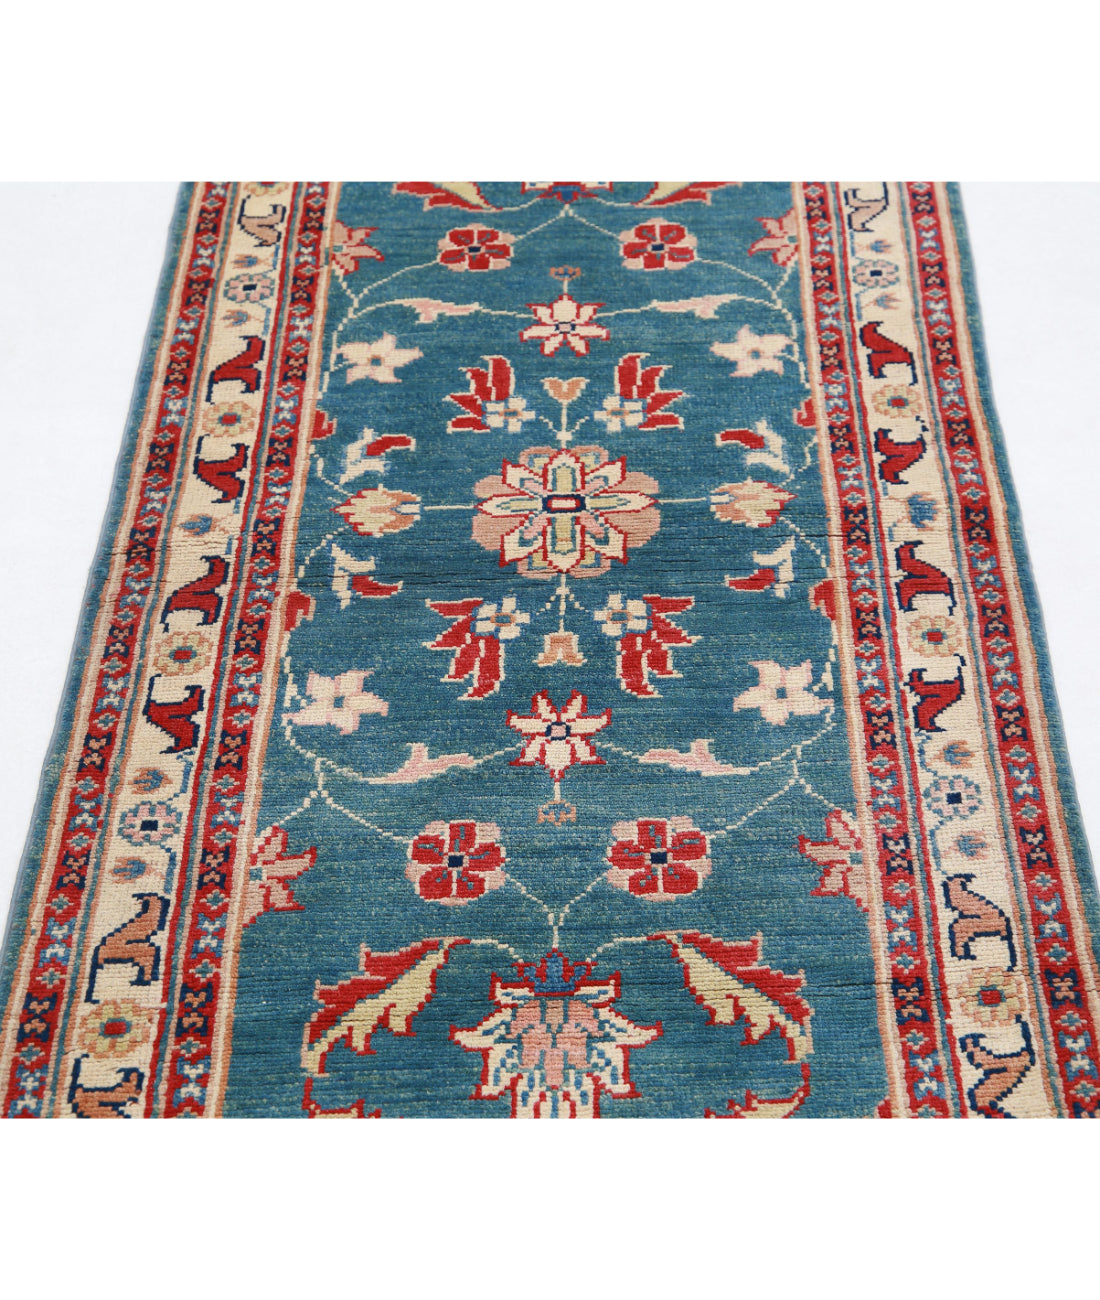 Ziegler 2'6'' X 6'5'' Hand-Knotted Wool Rug 2'6'' x 6'5'' (75 X 193) / Blue / Ivory